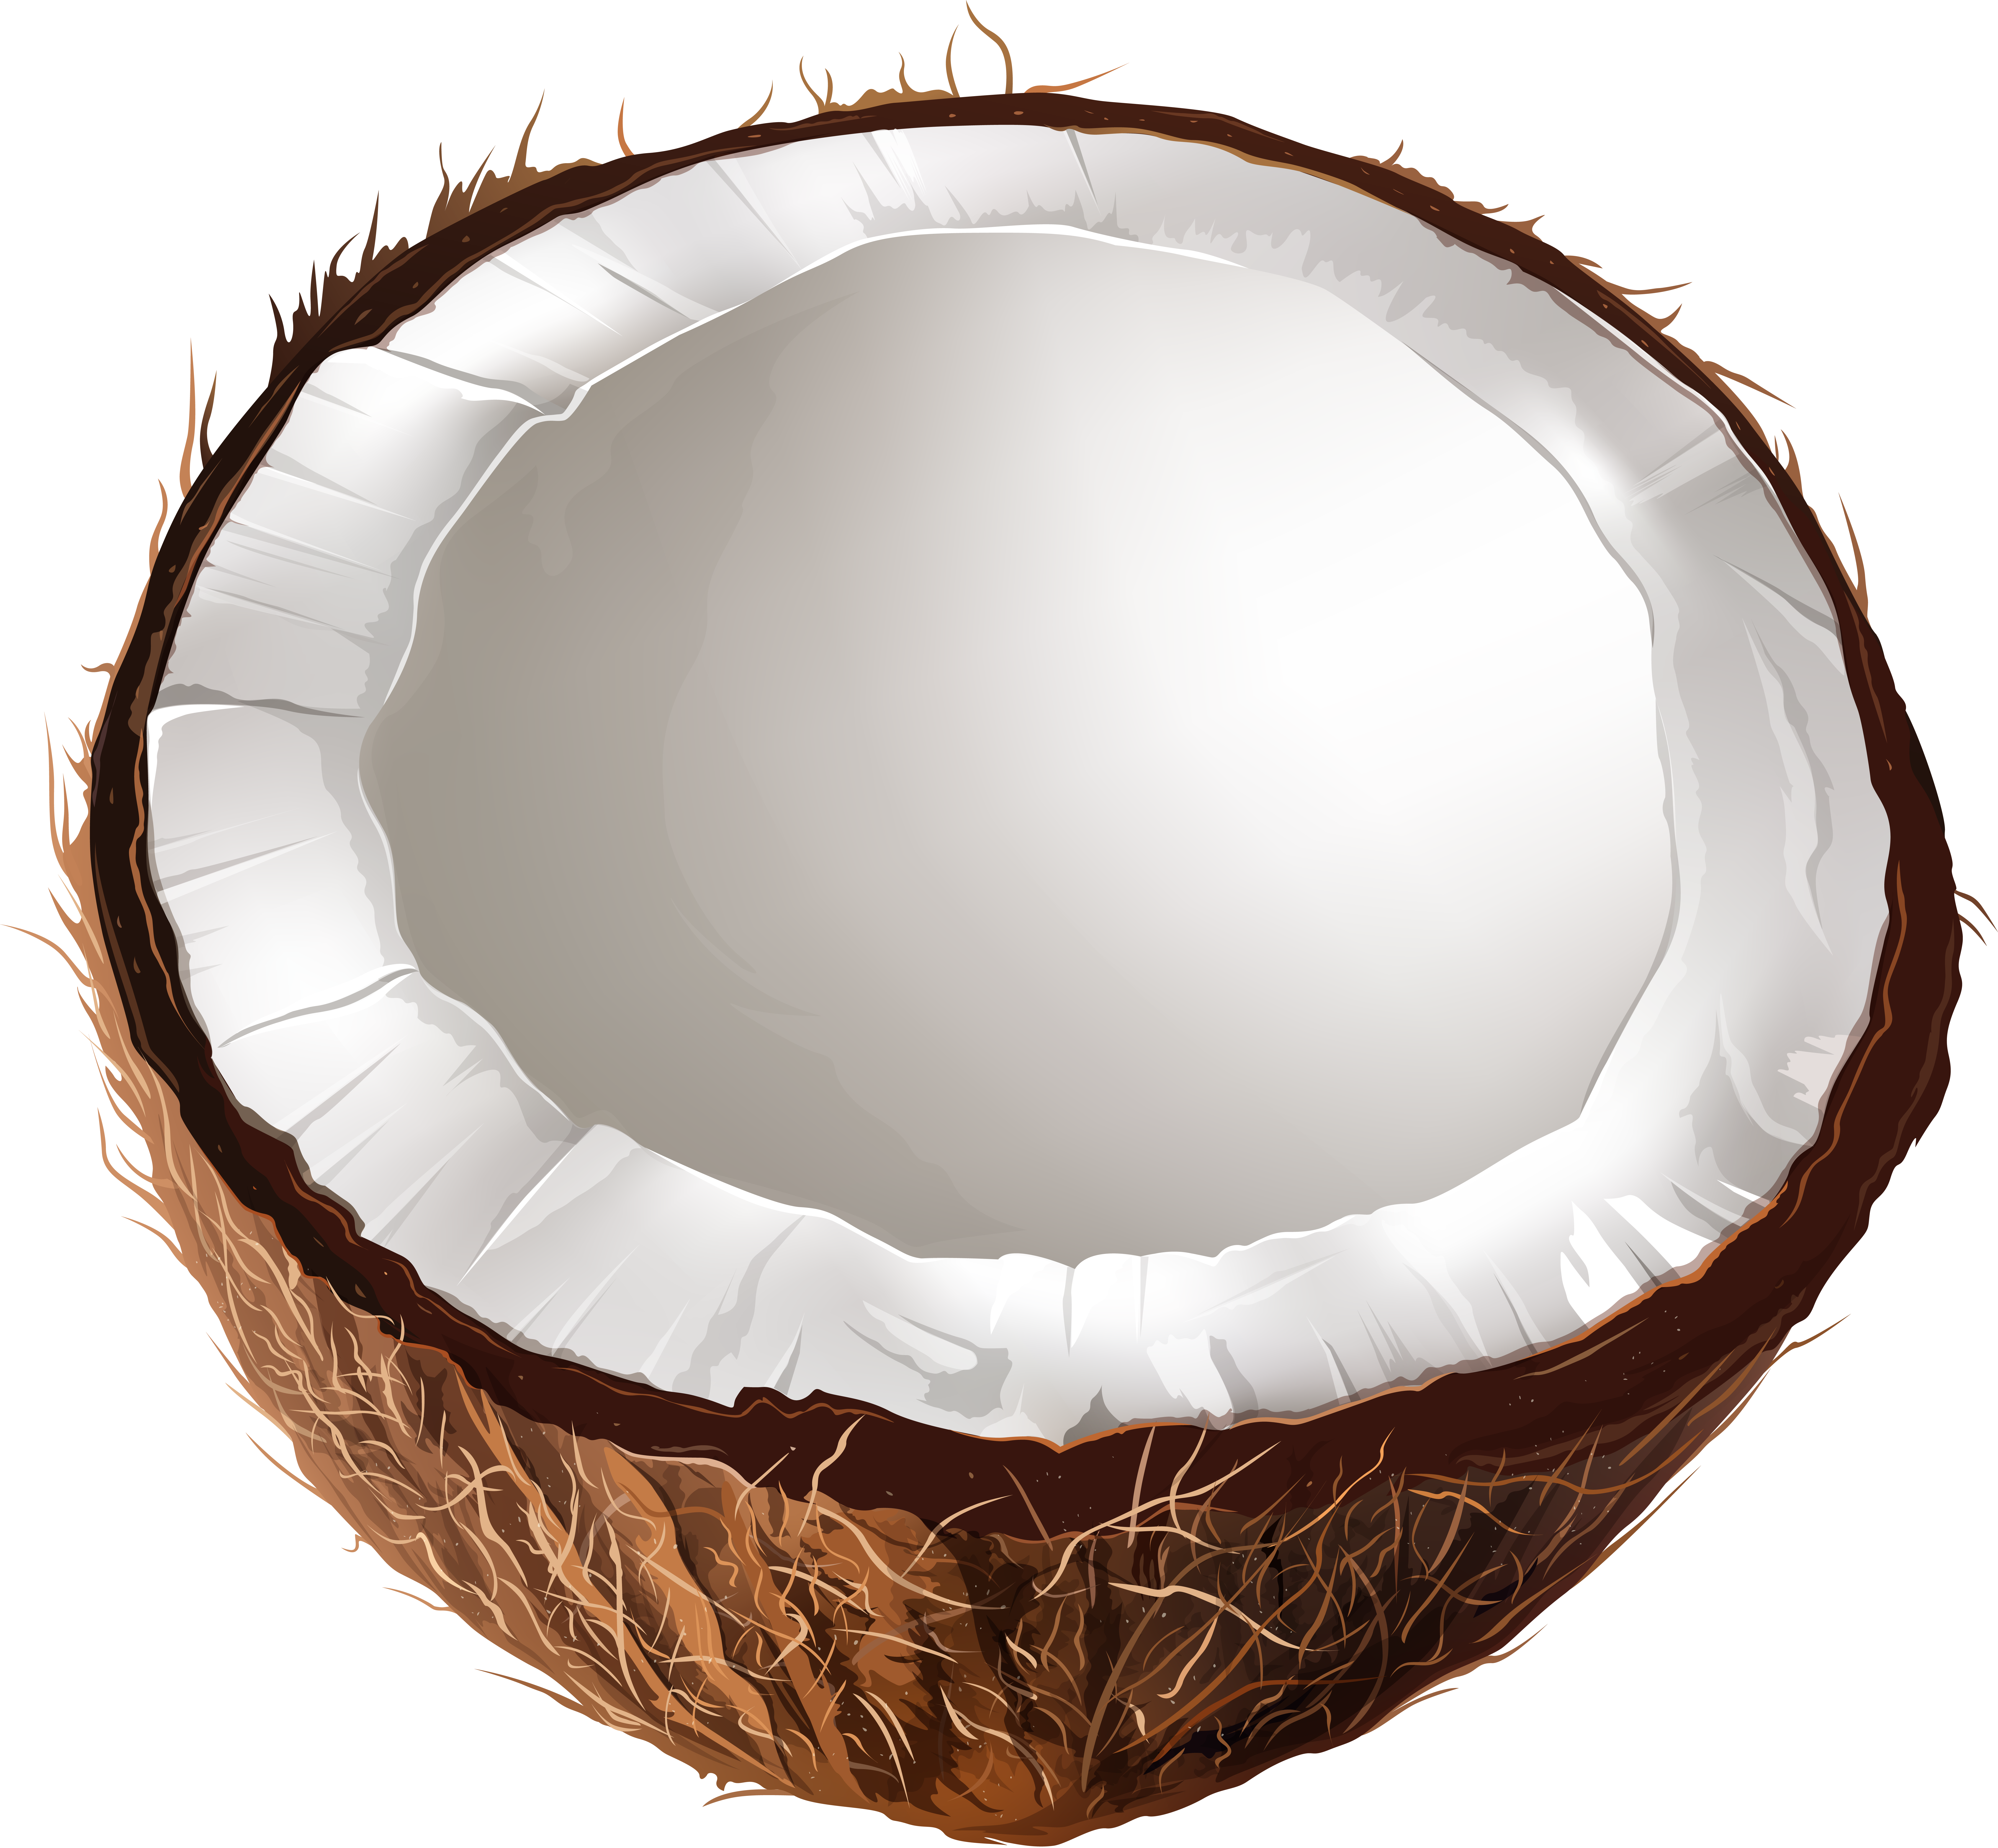 large PNG  image coconut